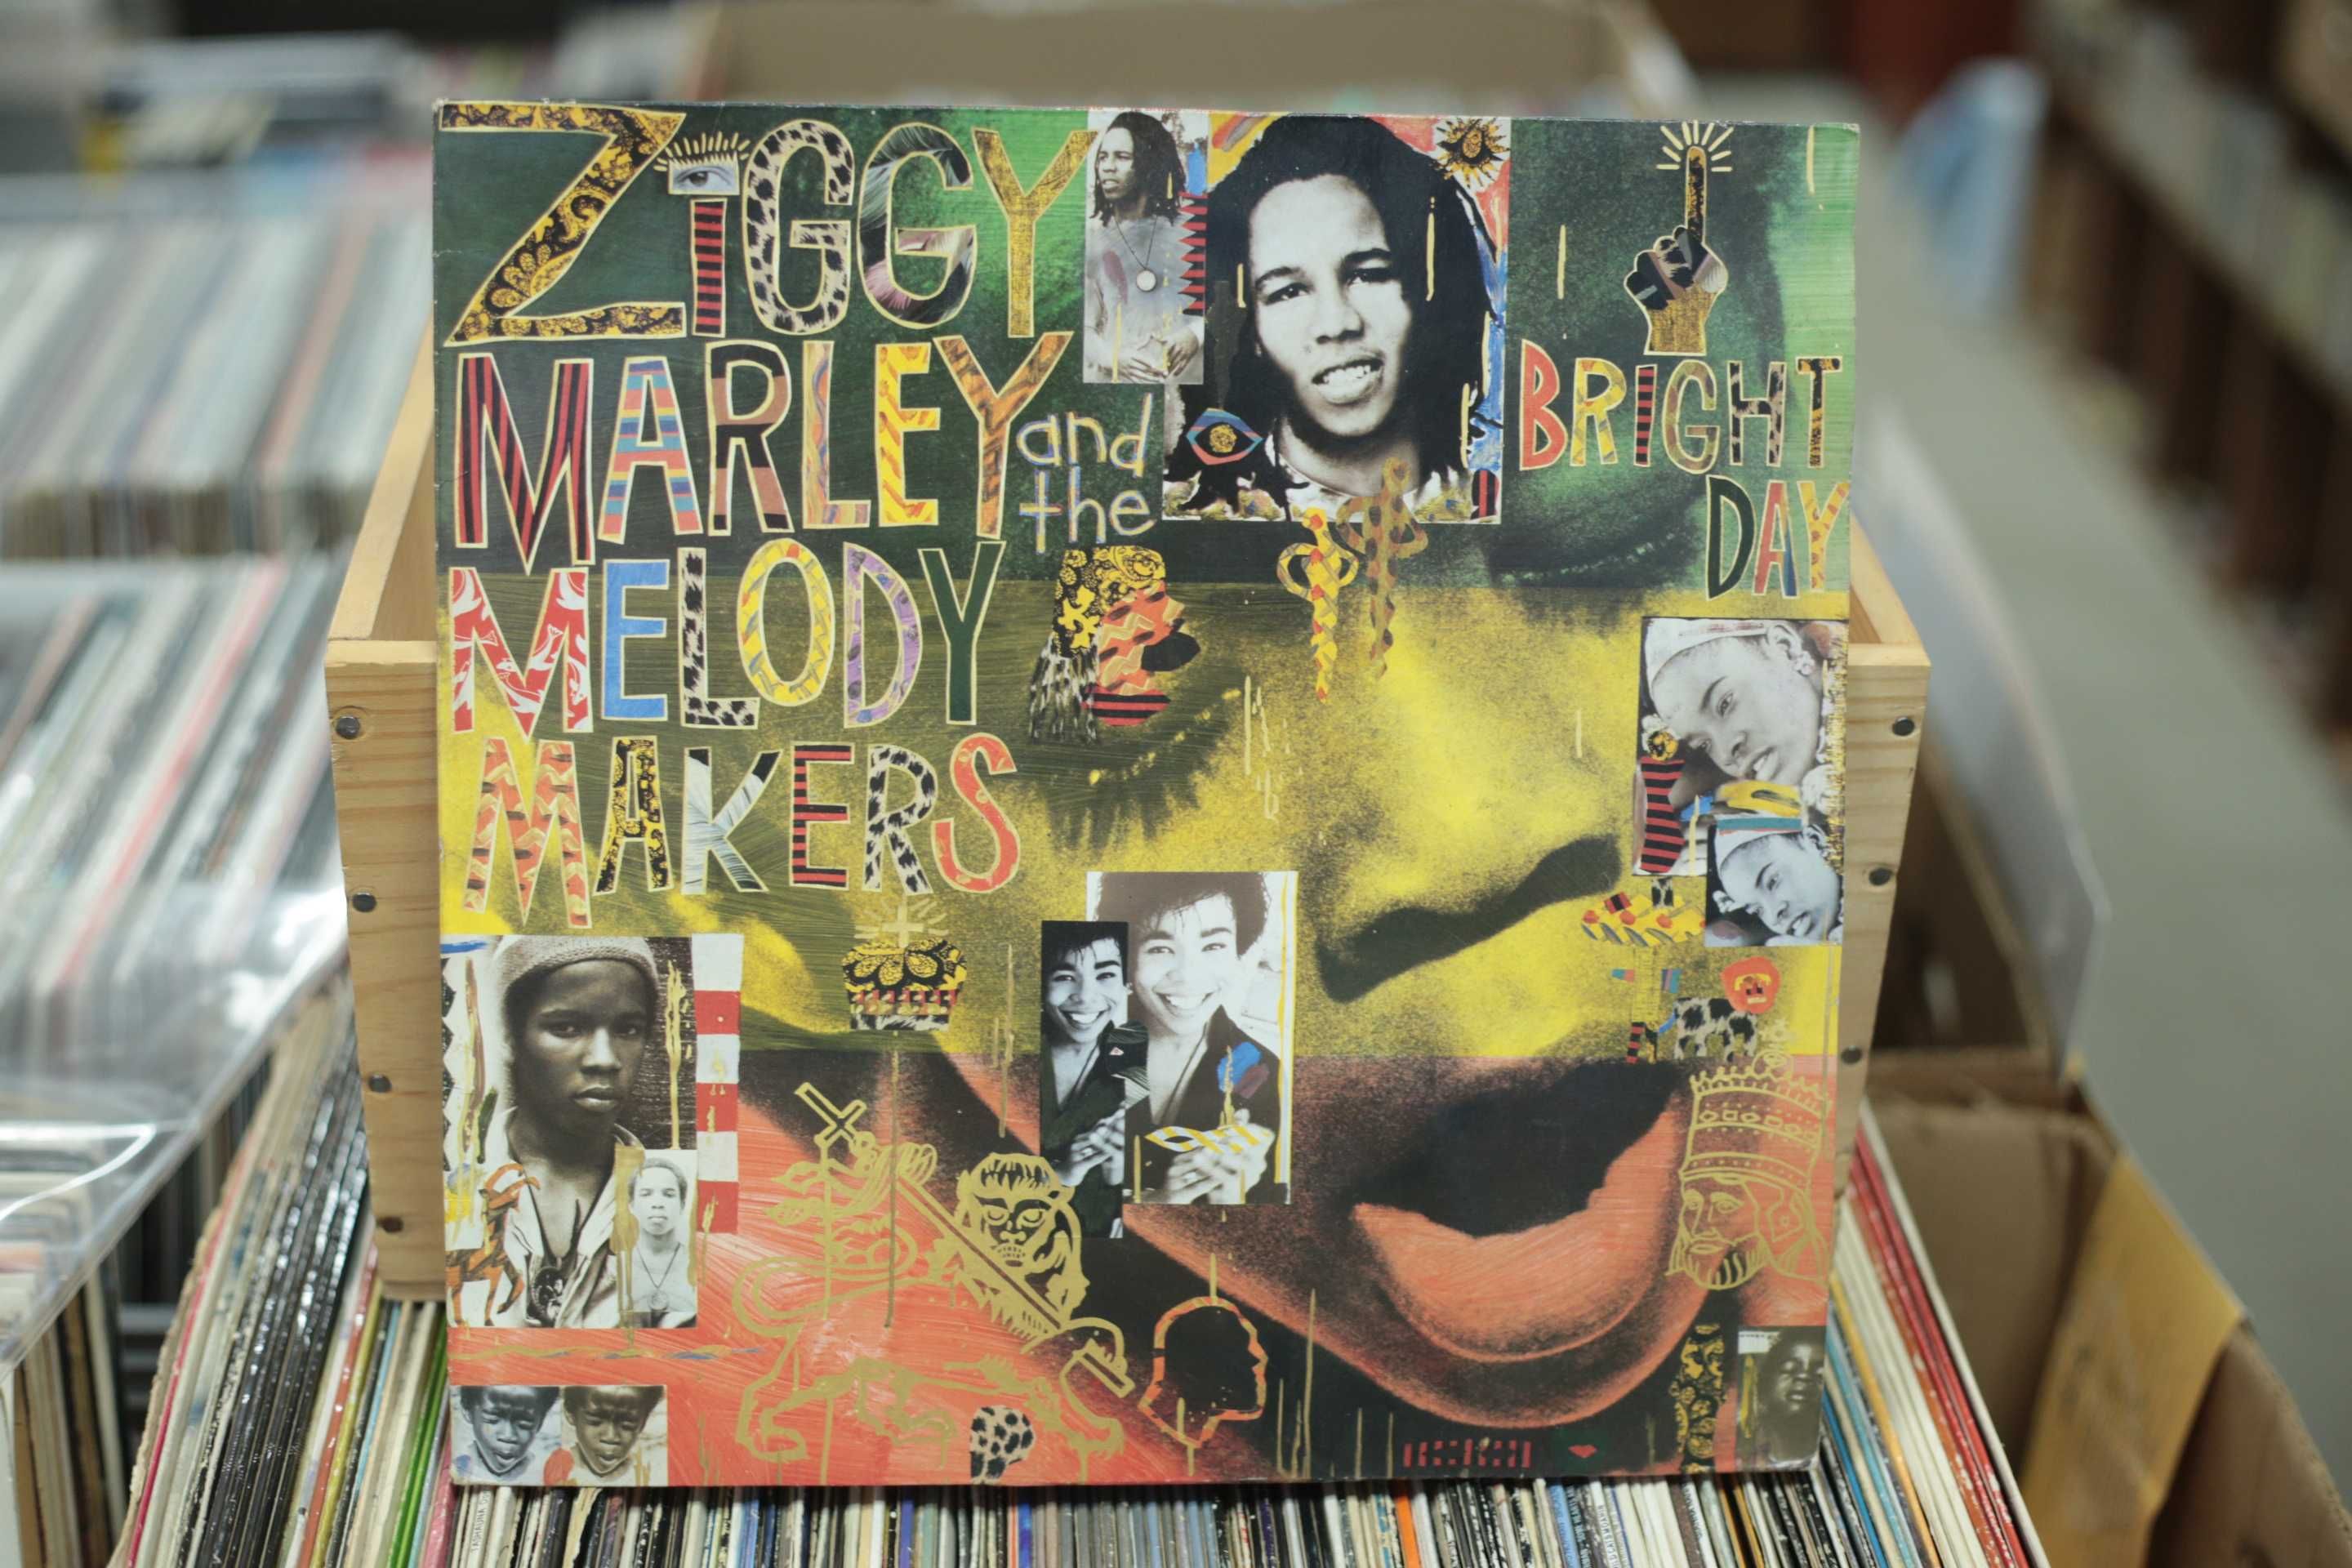 LP ZIGGY MARLEY and the Melody Makers - Bright Day